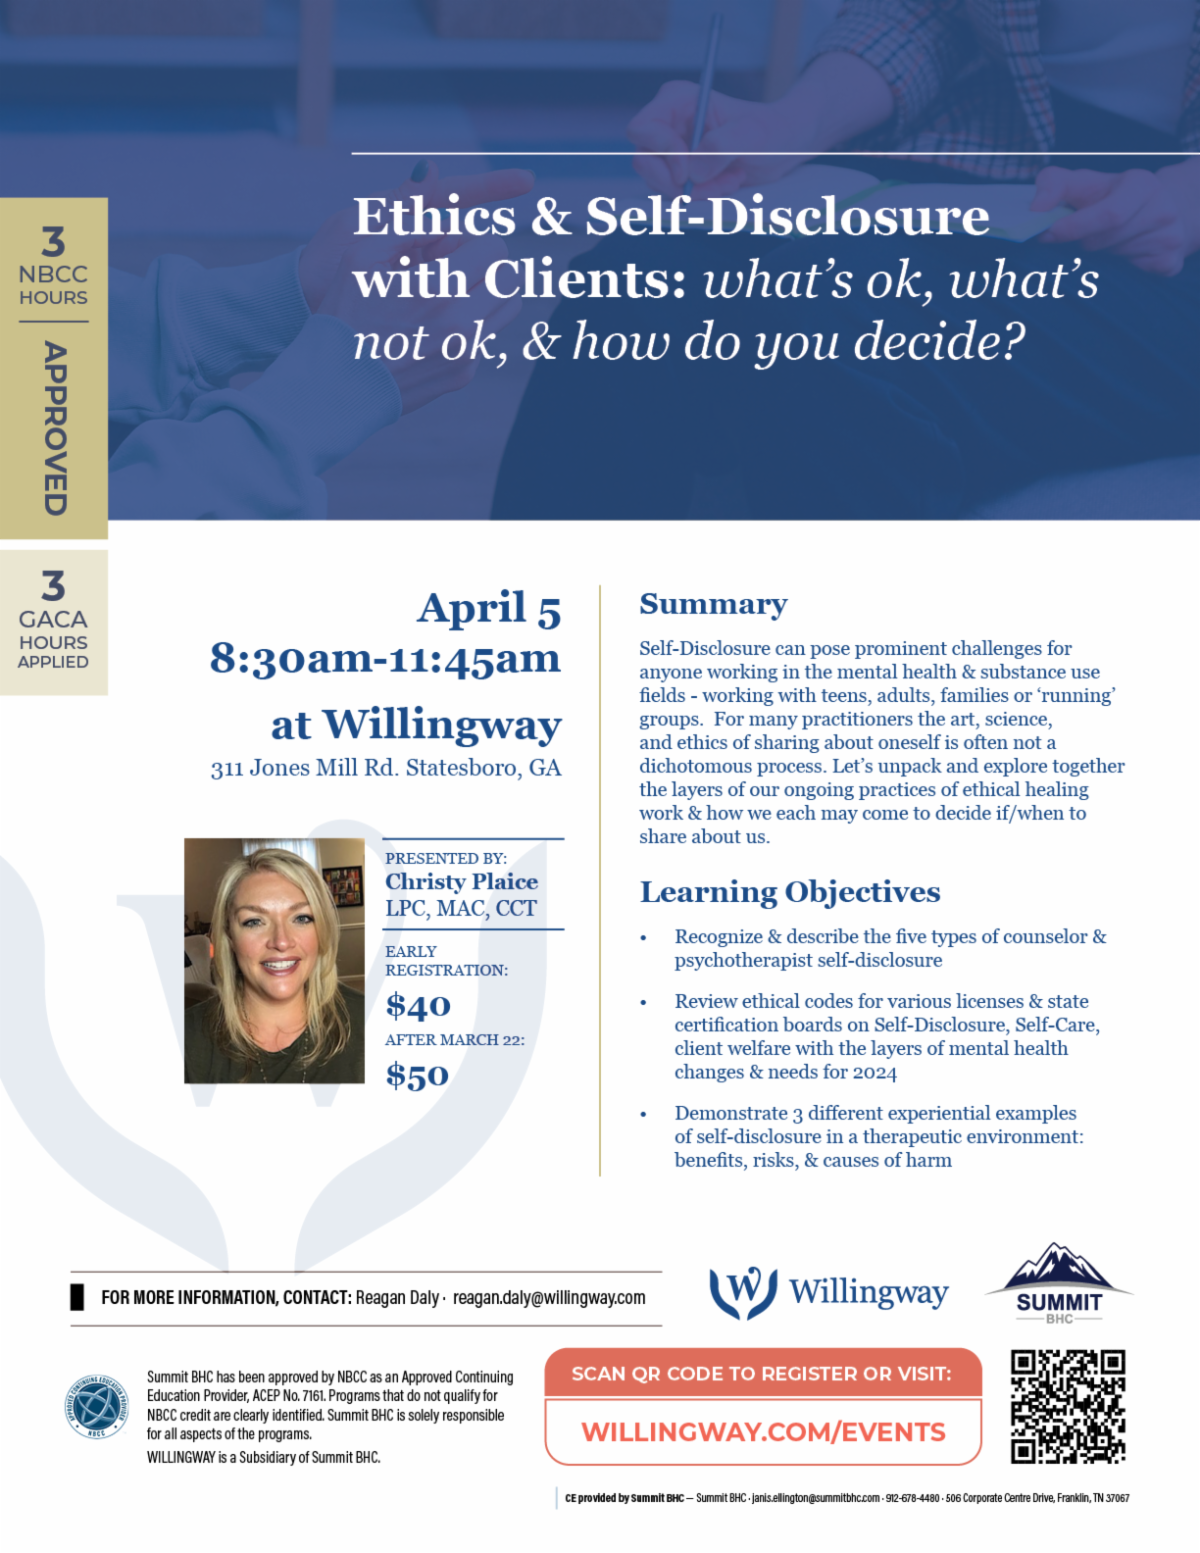 Ethics & Self-Disclosure with Clients: what’s ok, what’s not ok, & how do you decide?